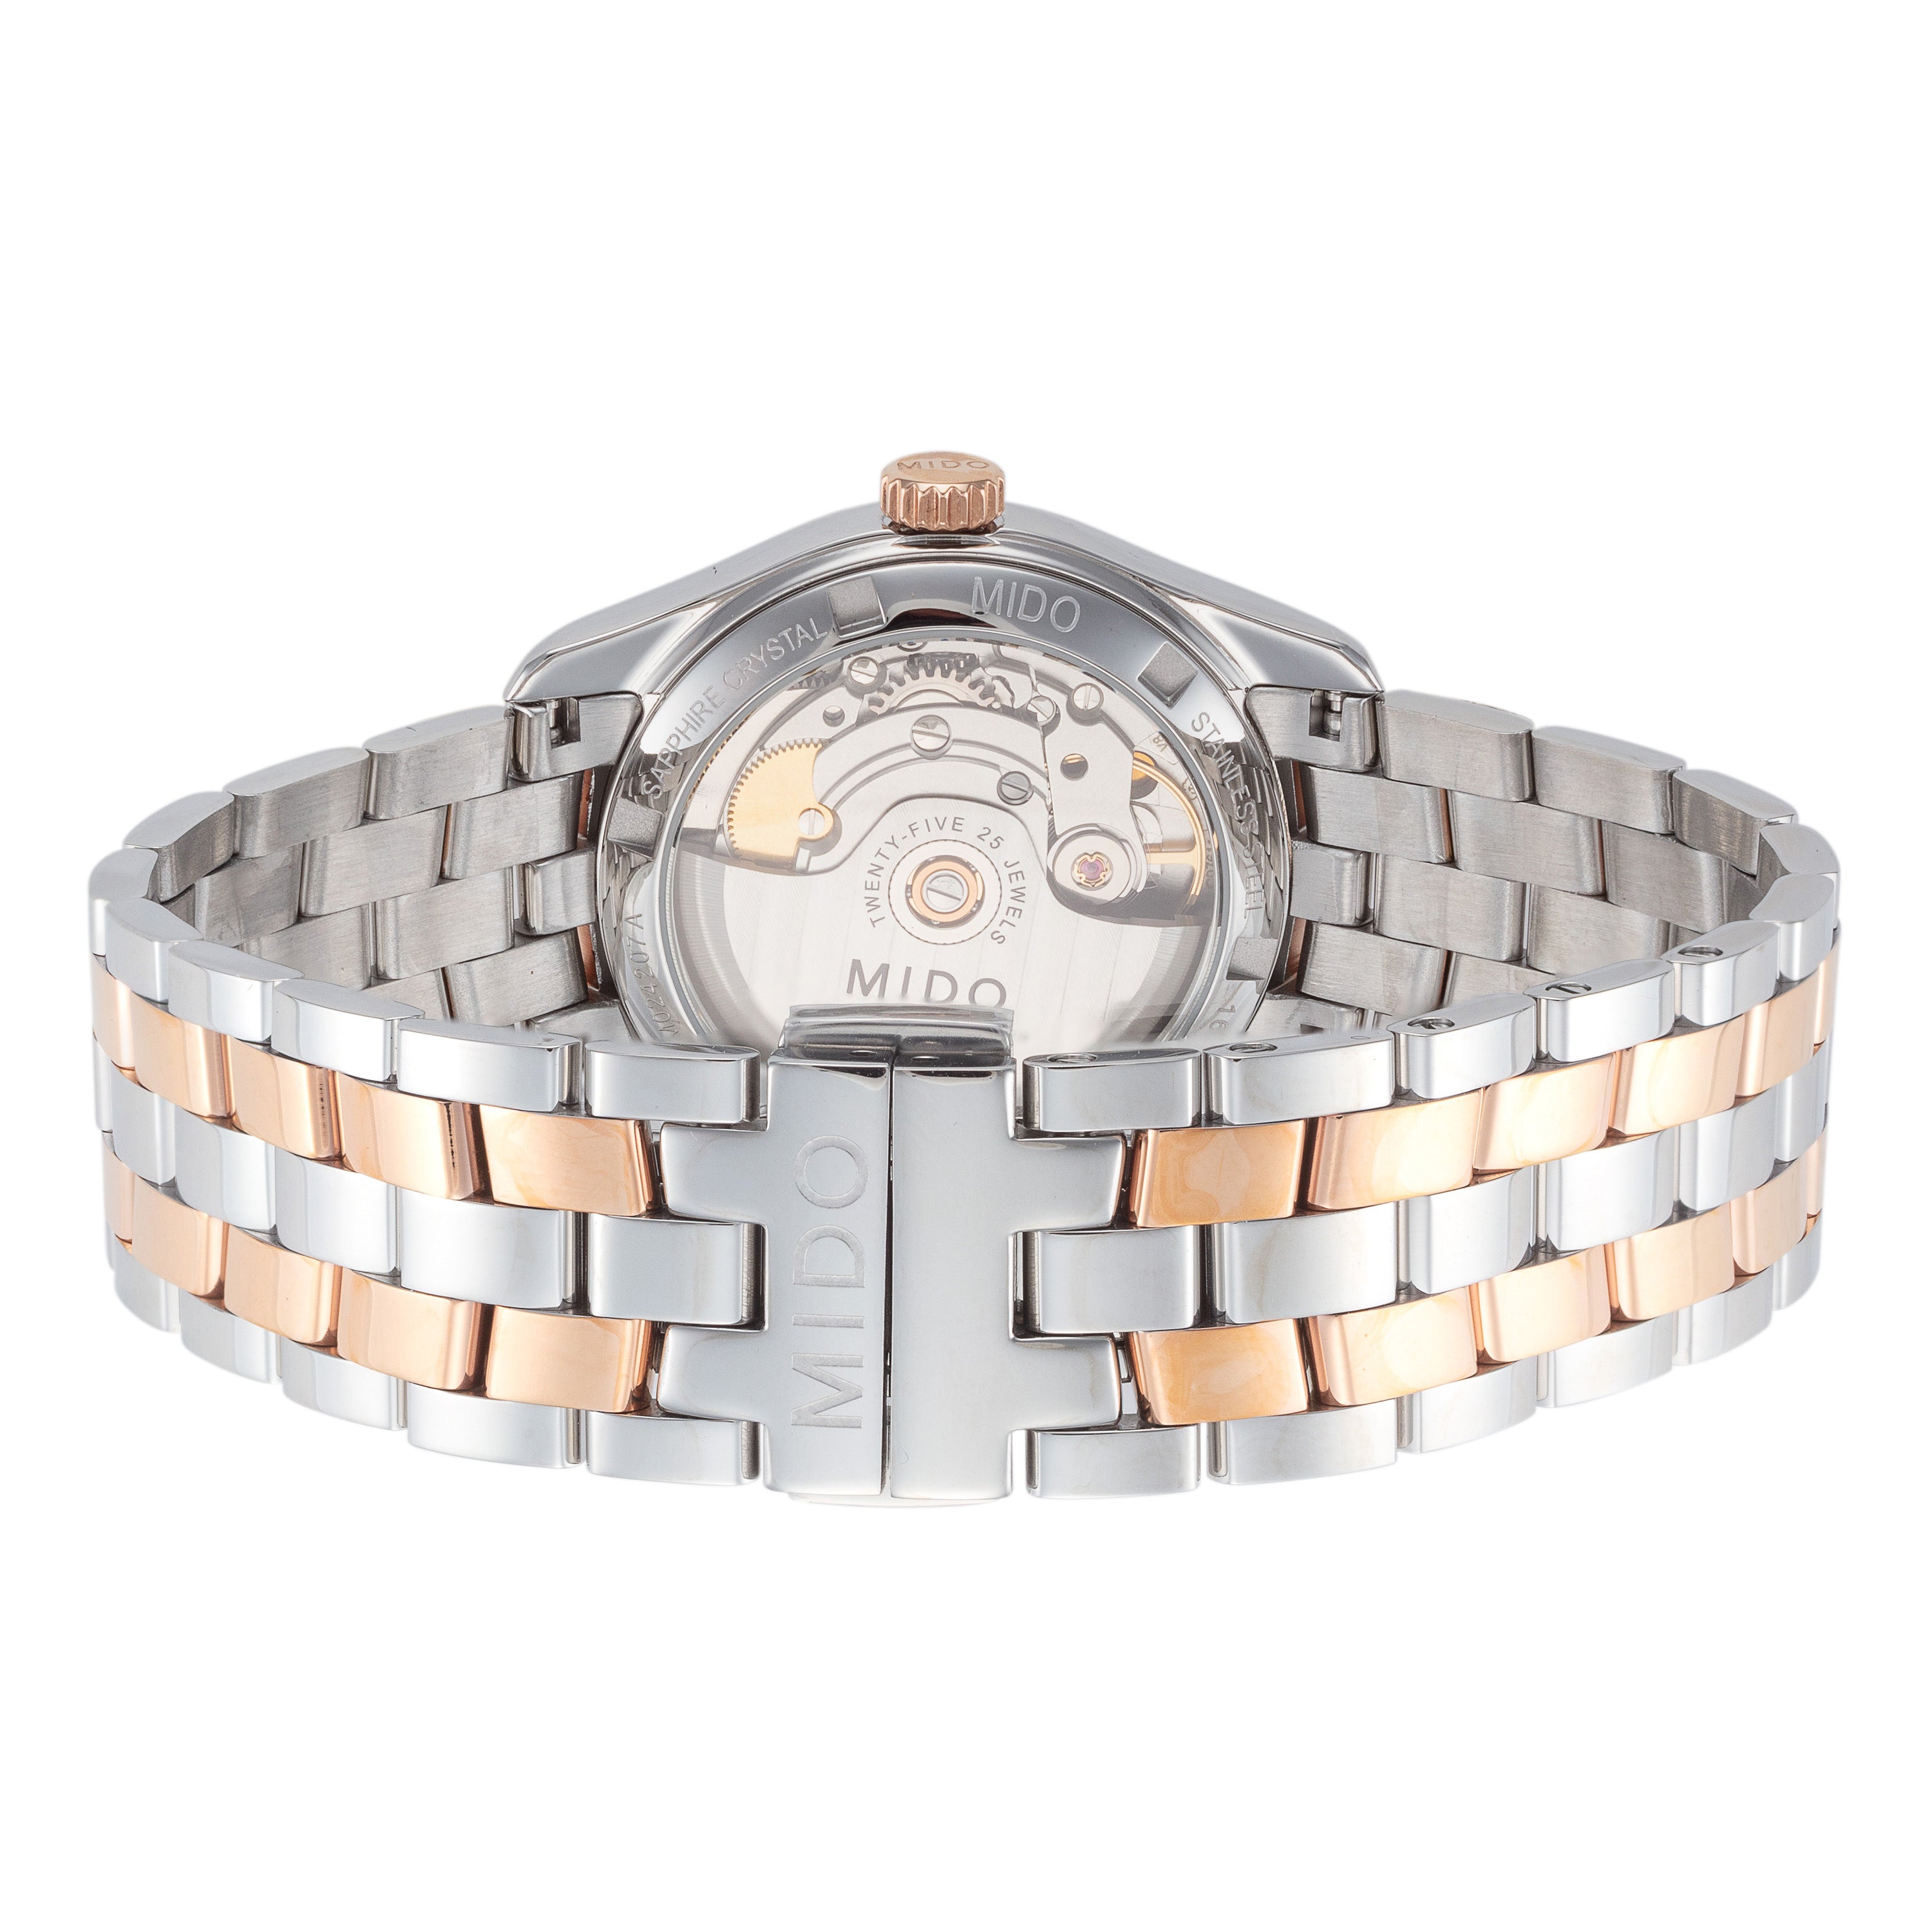 title:Mido Women's M0242072211000 Belluna II 33mm Automatic Watch;color:Silver and Rose Gold